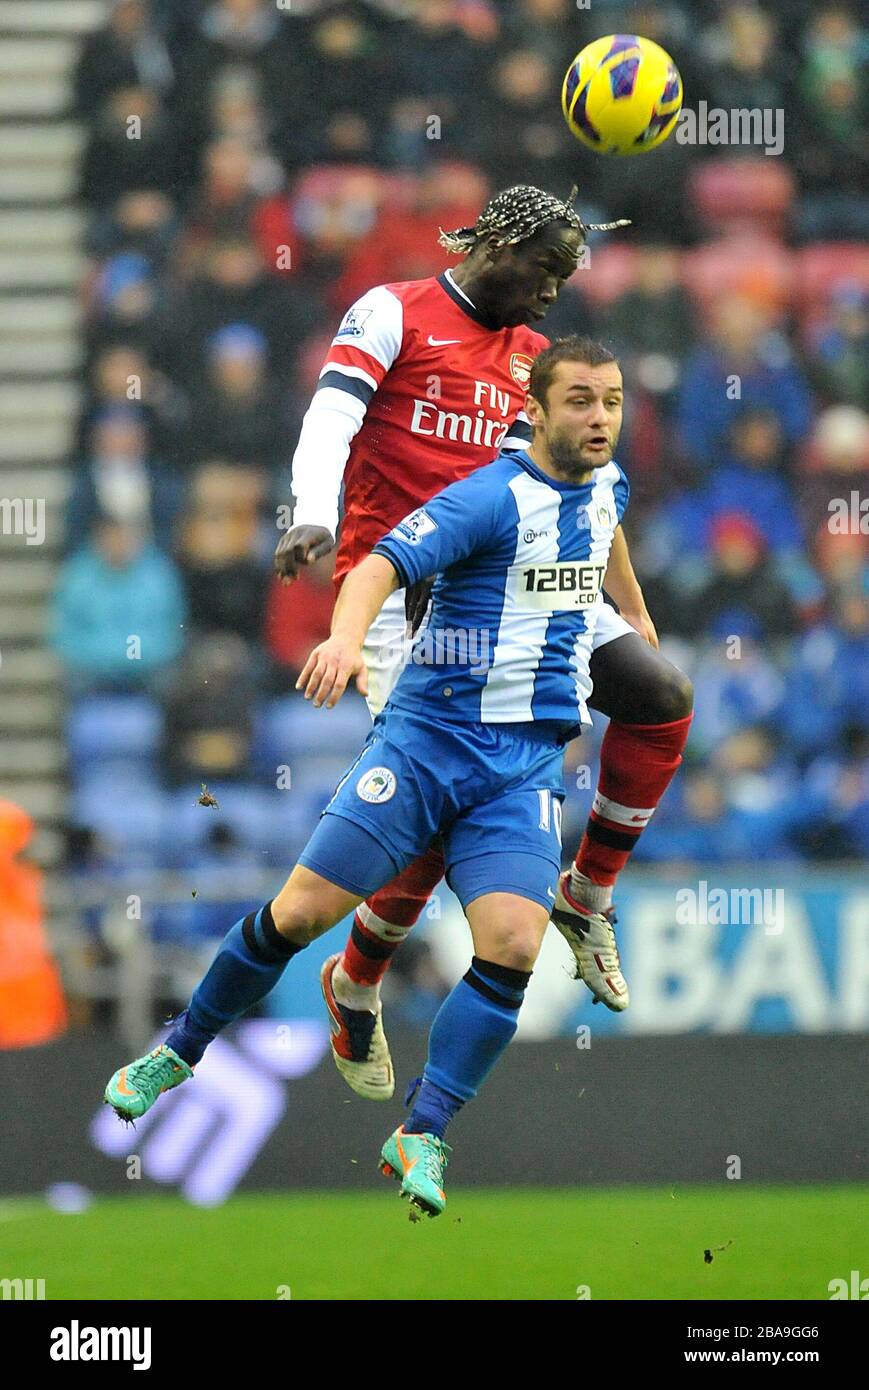 Wigan Athletic's Shaun Maloney (front) and Arsenal's Bacary Sagna (back) battle for the ball Stock Photo